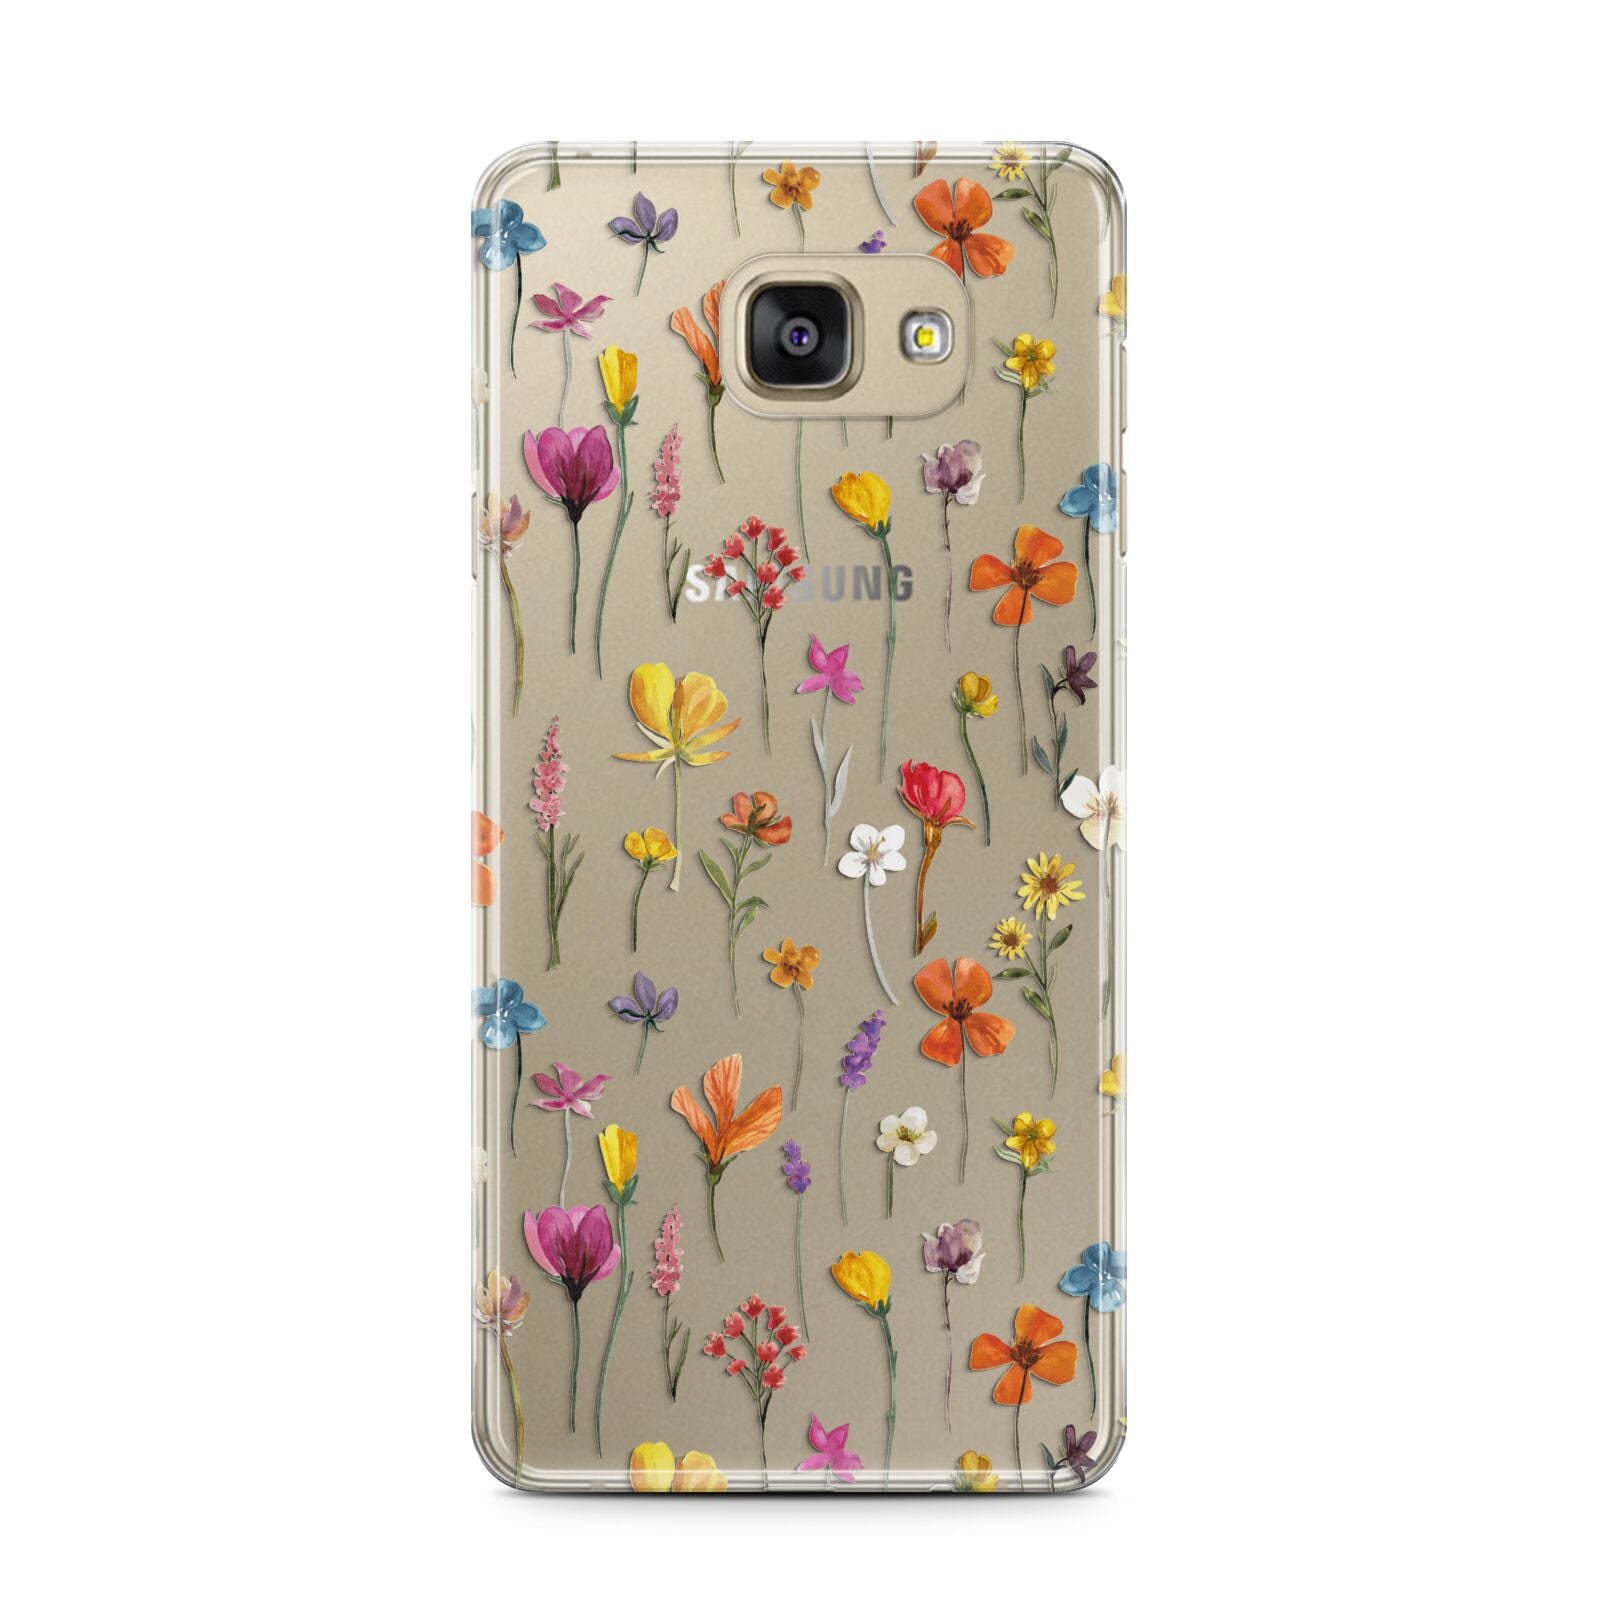 Botanical Floral Samsung Galaxy A7 2016 Case on gold phone